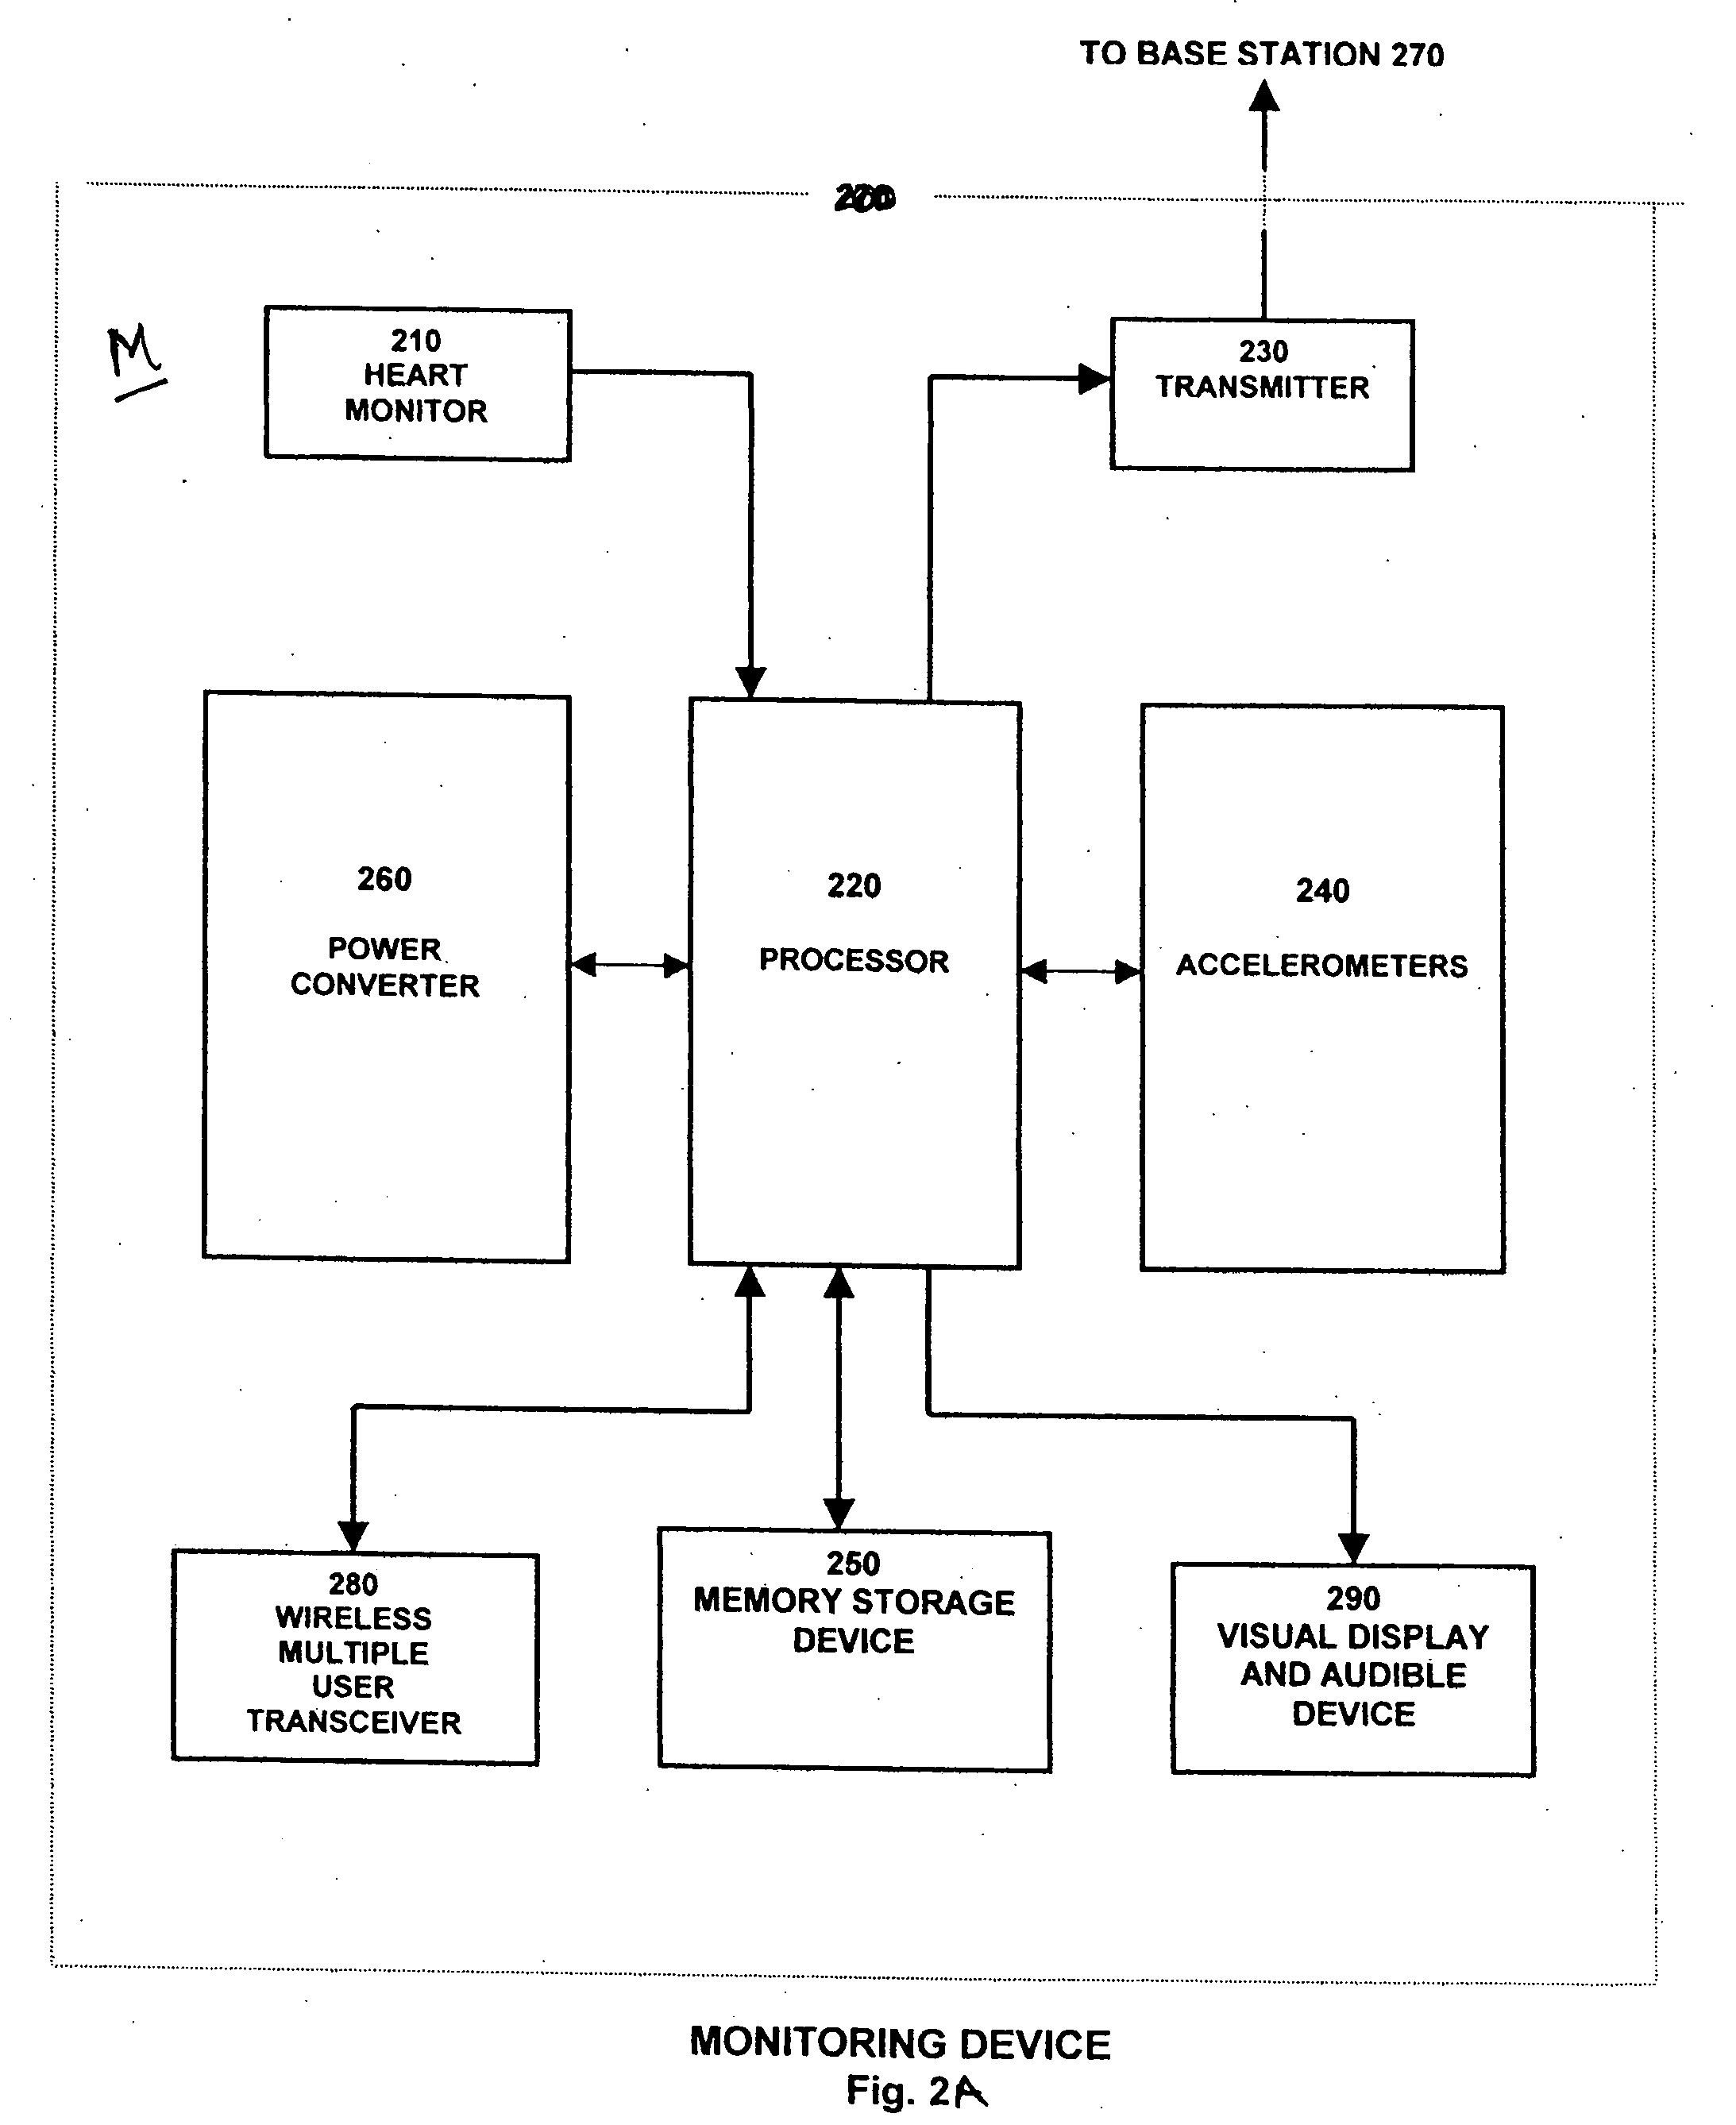 Methods and apparatus for determining work performed by an individual from measured physiological parameters